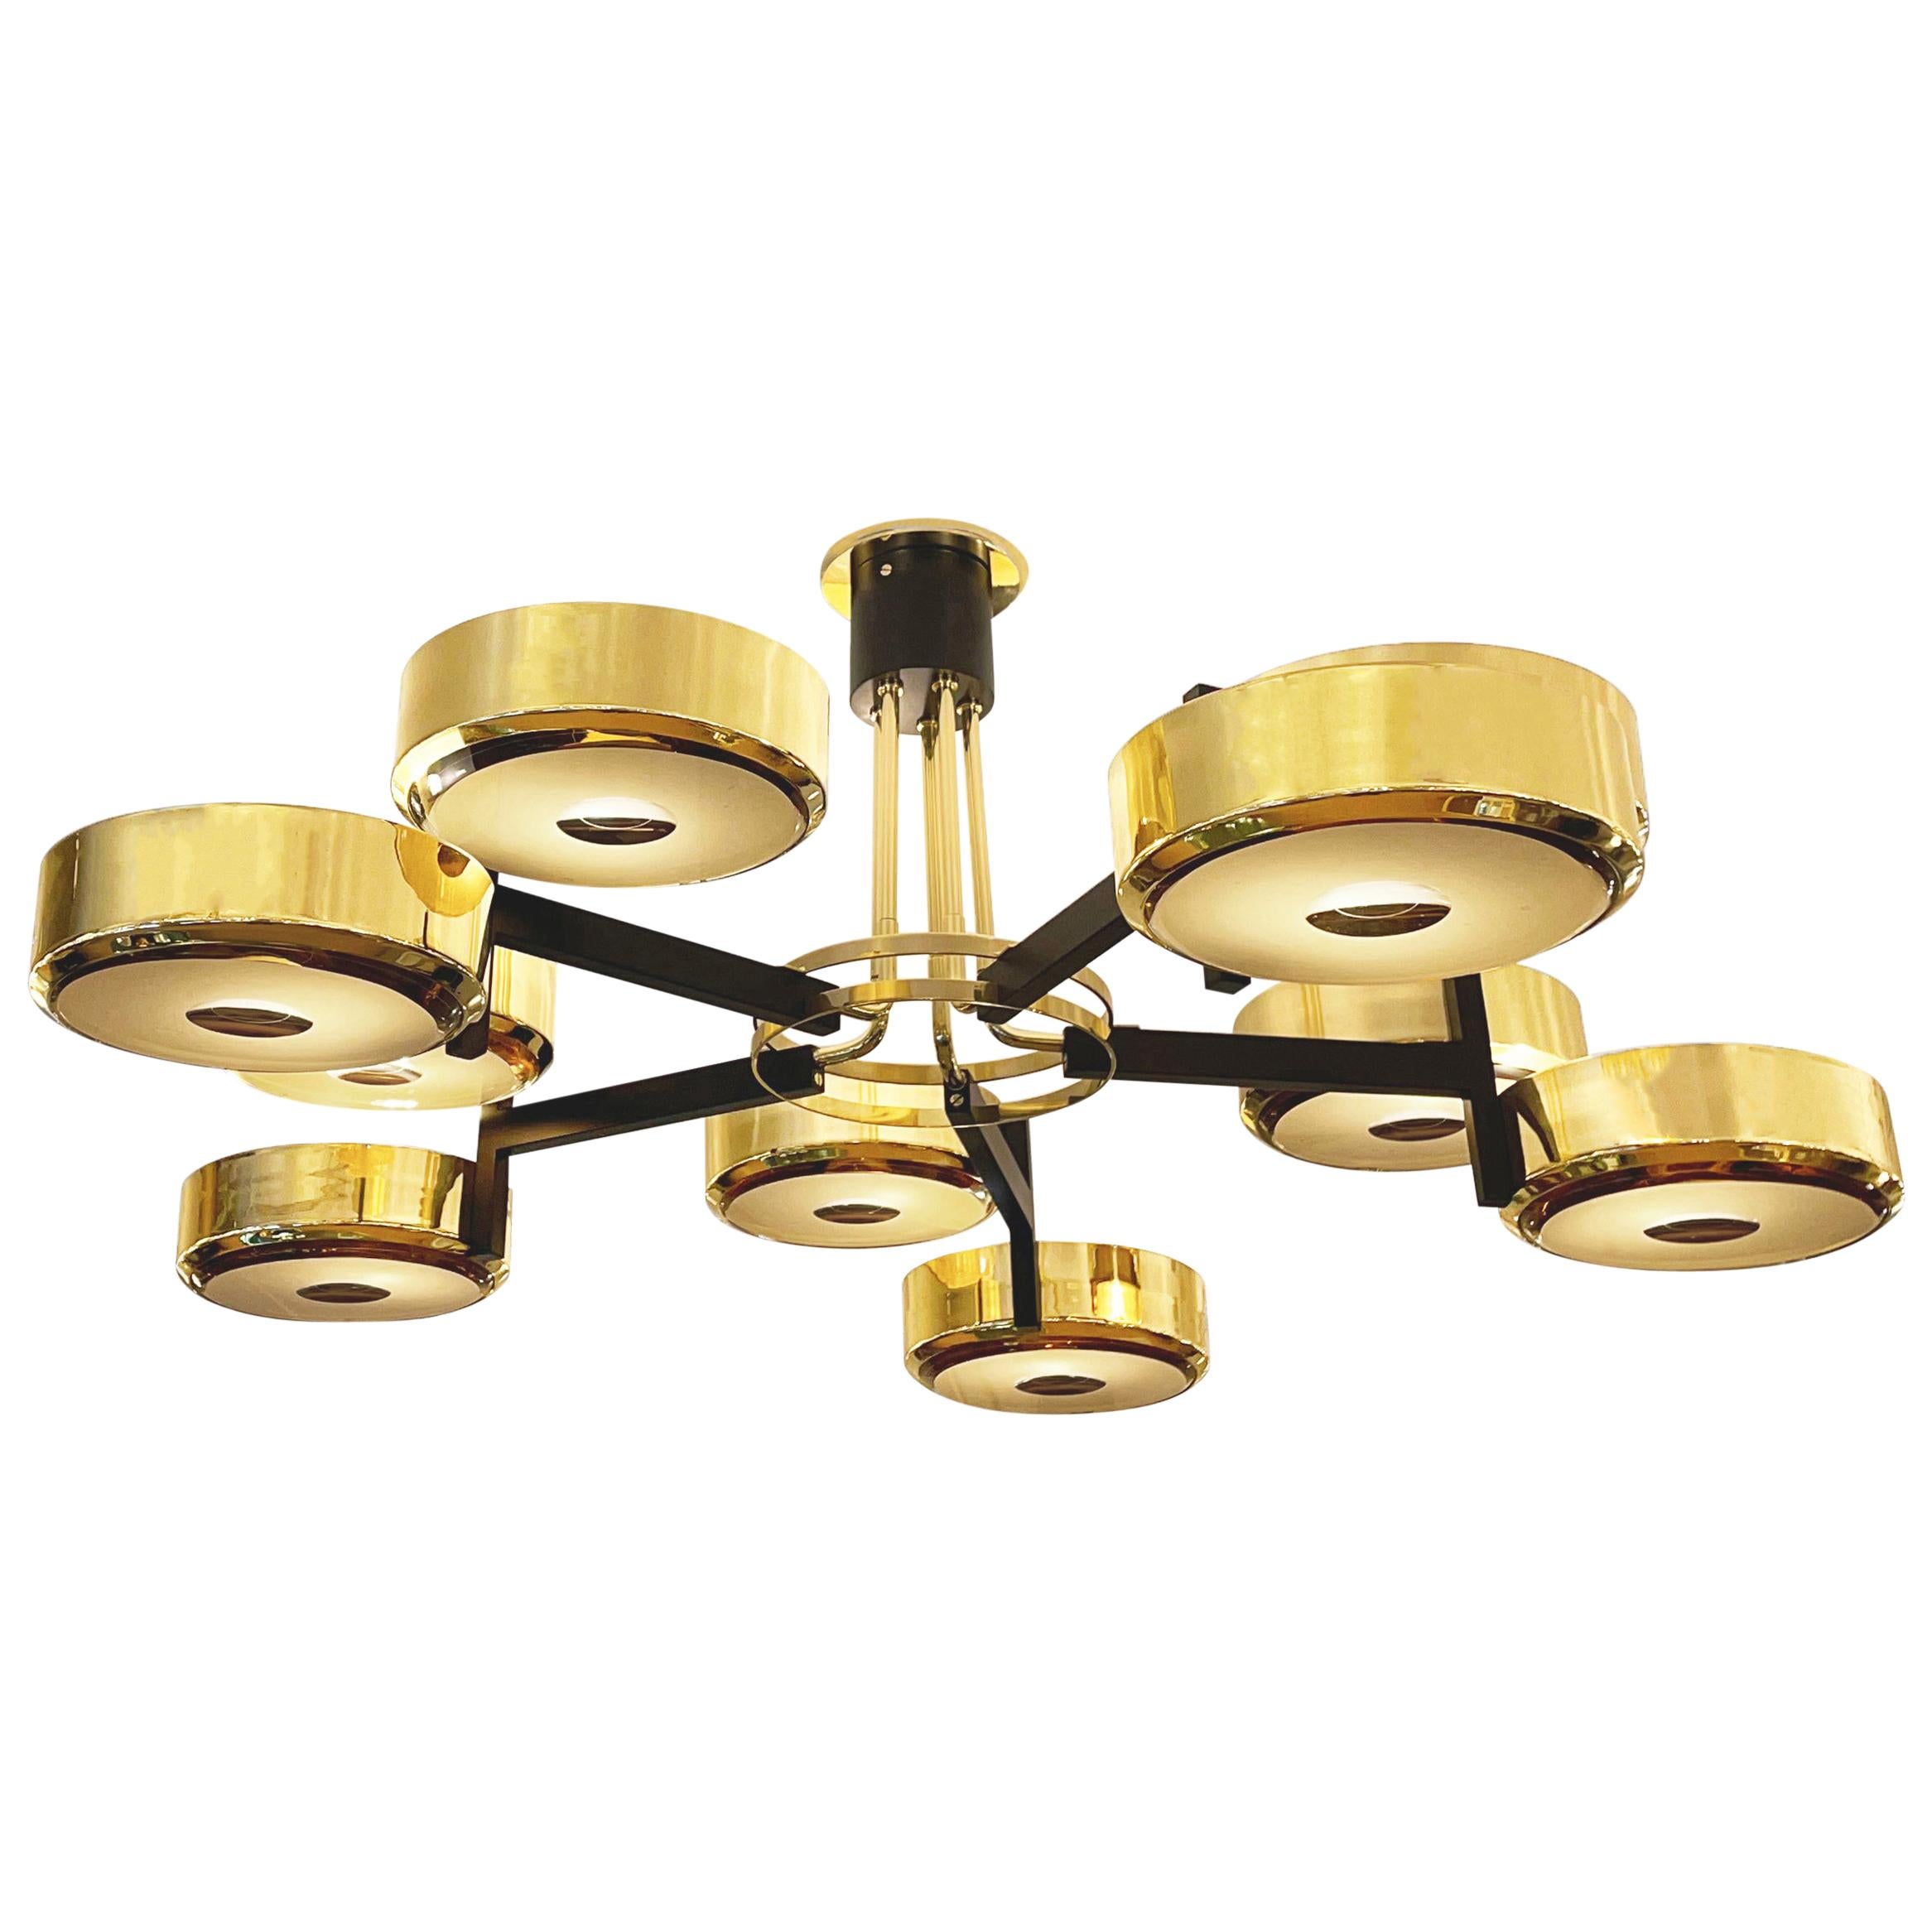 Eclissi Grande Ceiling Light by Gaspare Asaro - Carved Glass Version